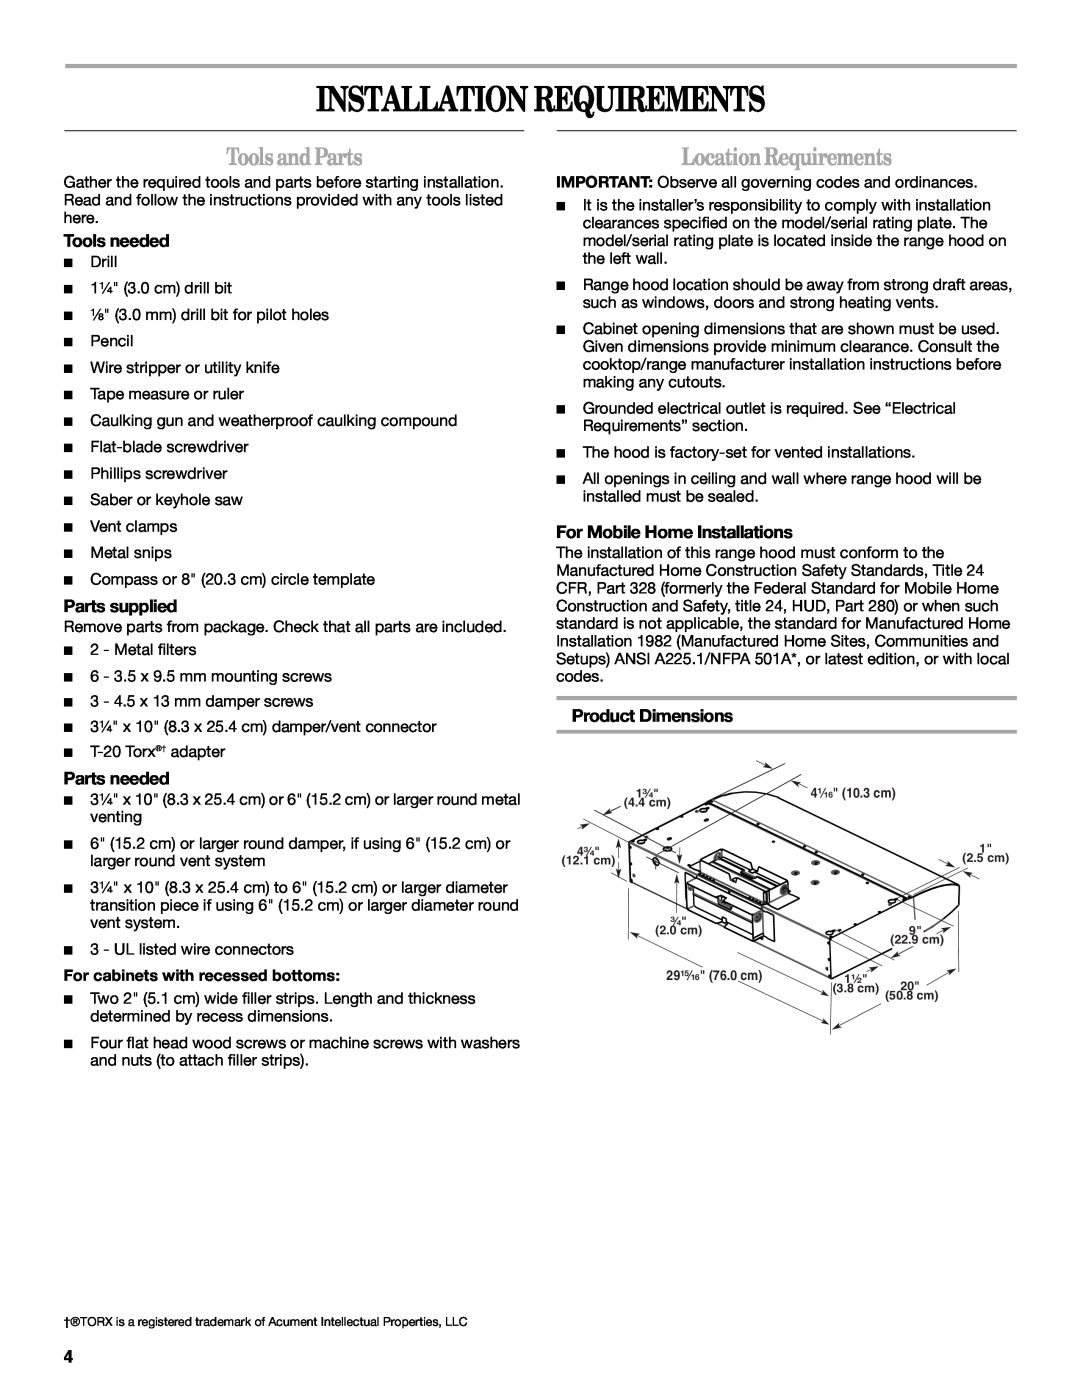 Whirlpool GXU7130DXS Installation Requirements, ToolsandParts, LocationRequirements, Tools needed, Parts supplied 